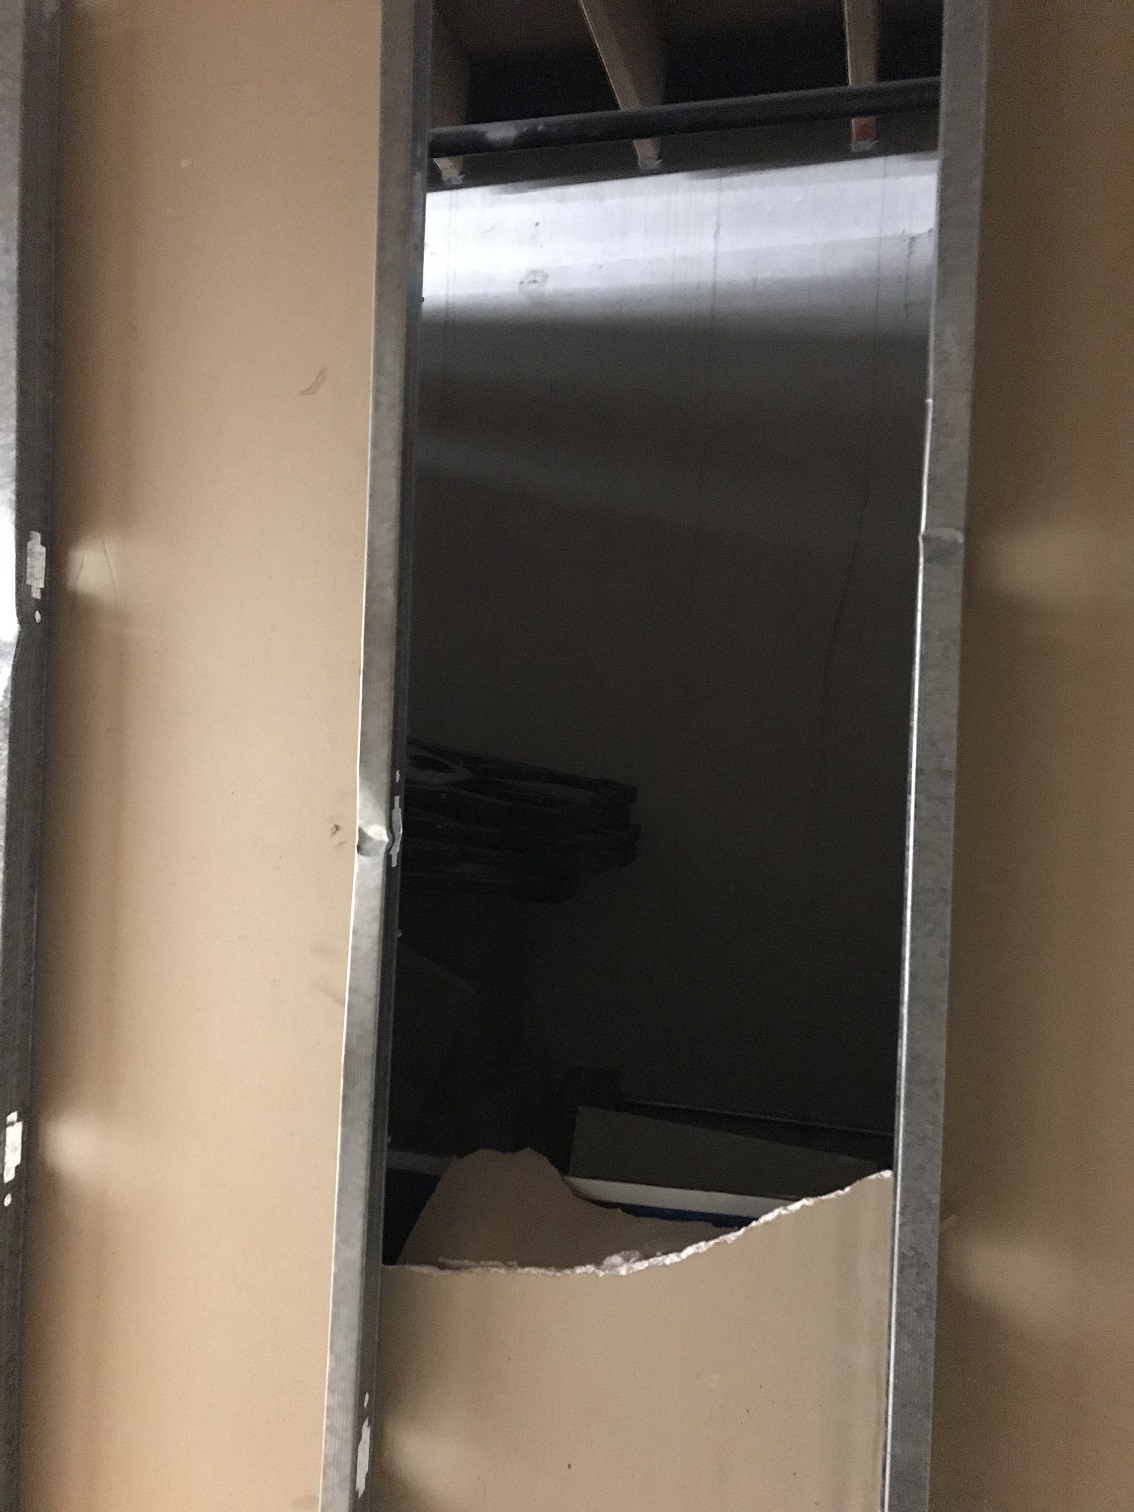 Hole in my storage unit, looking into other unit.